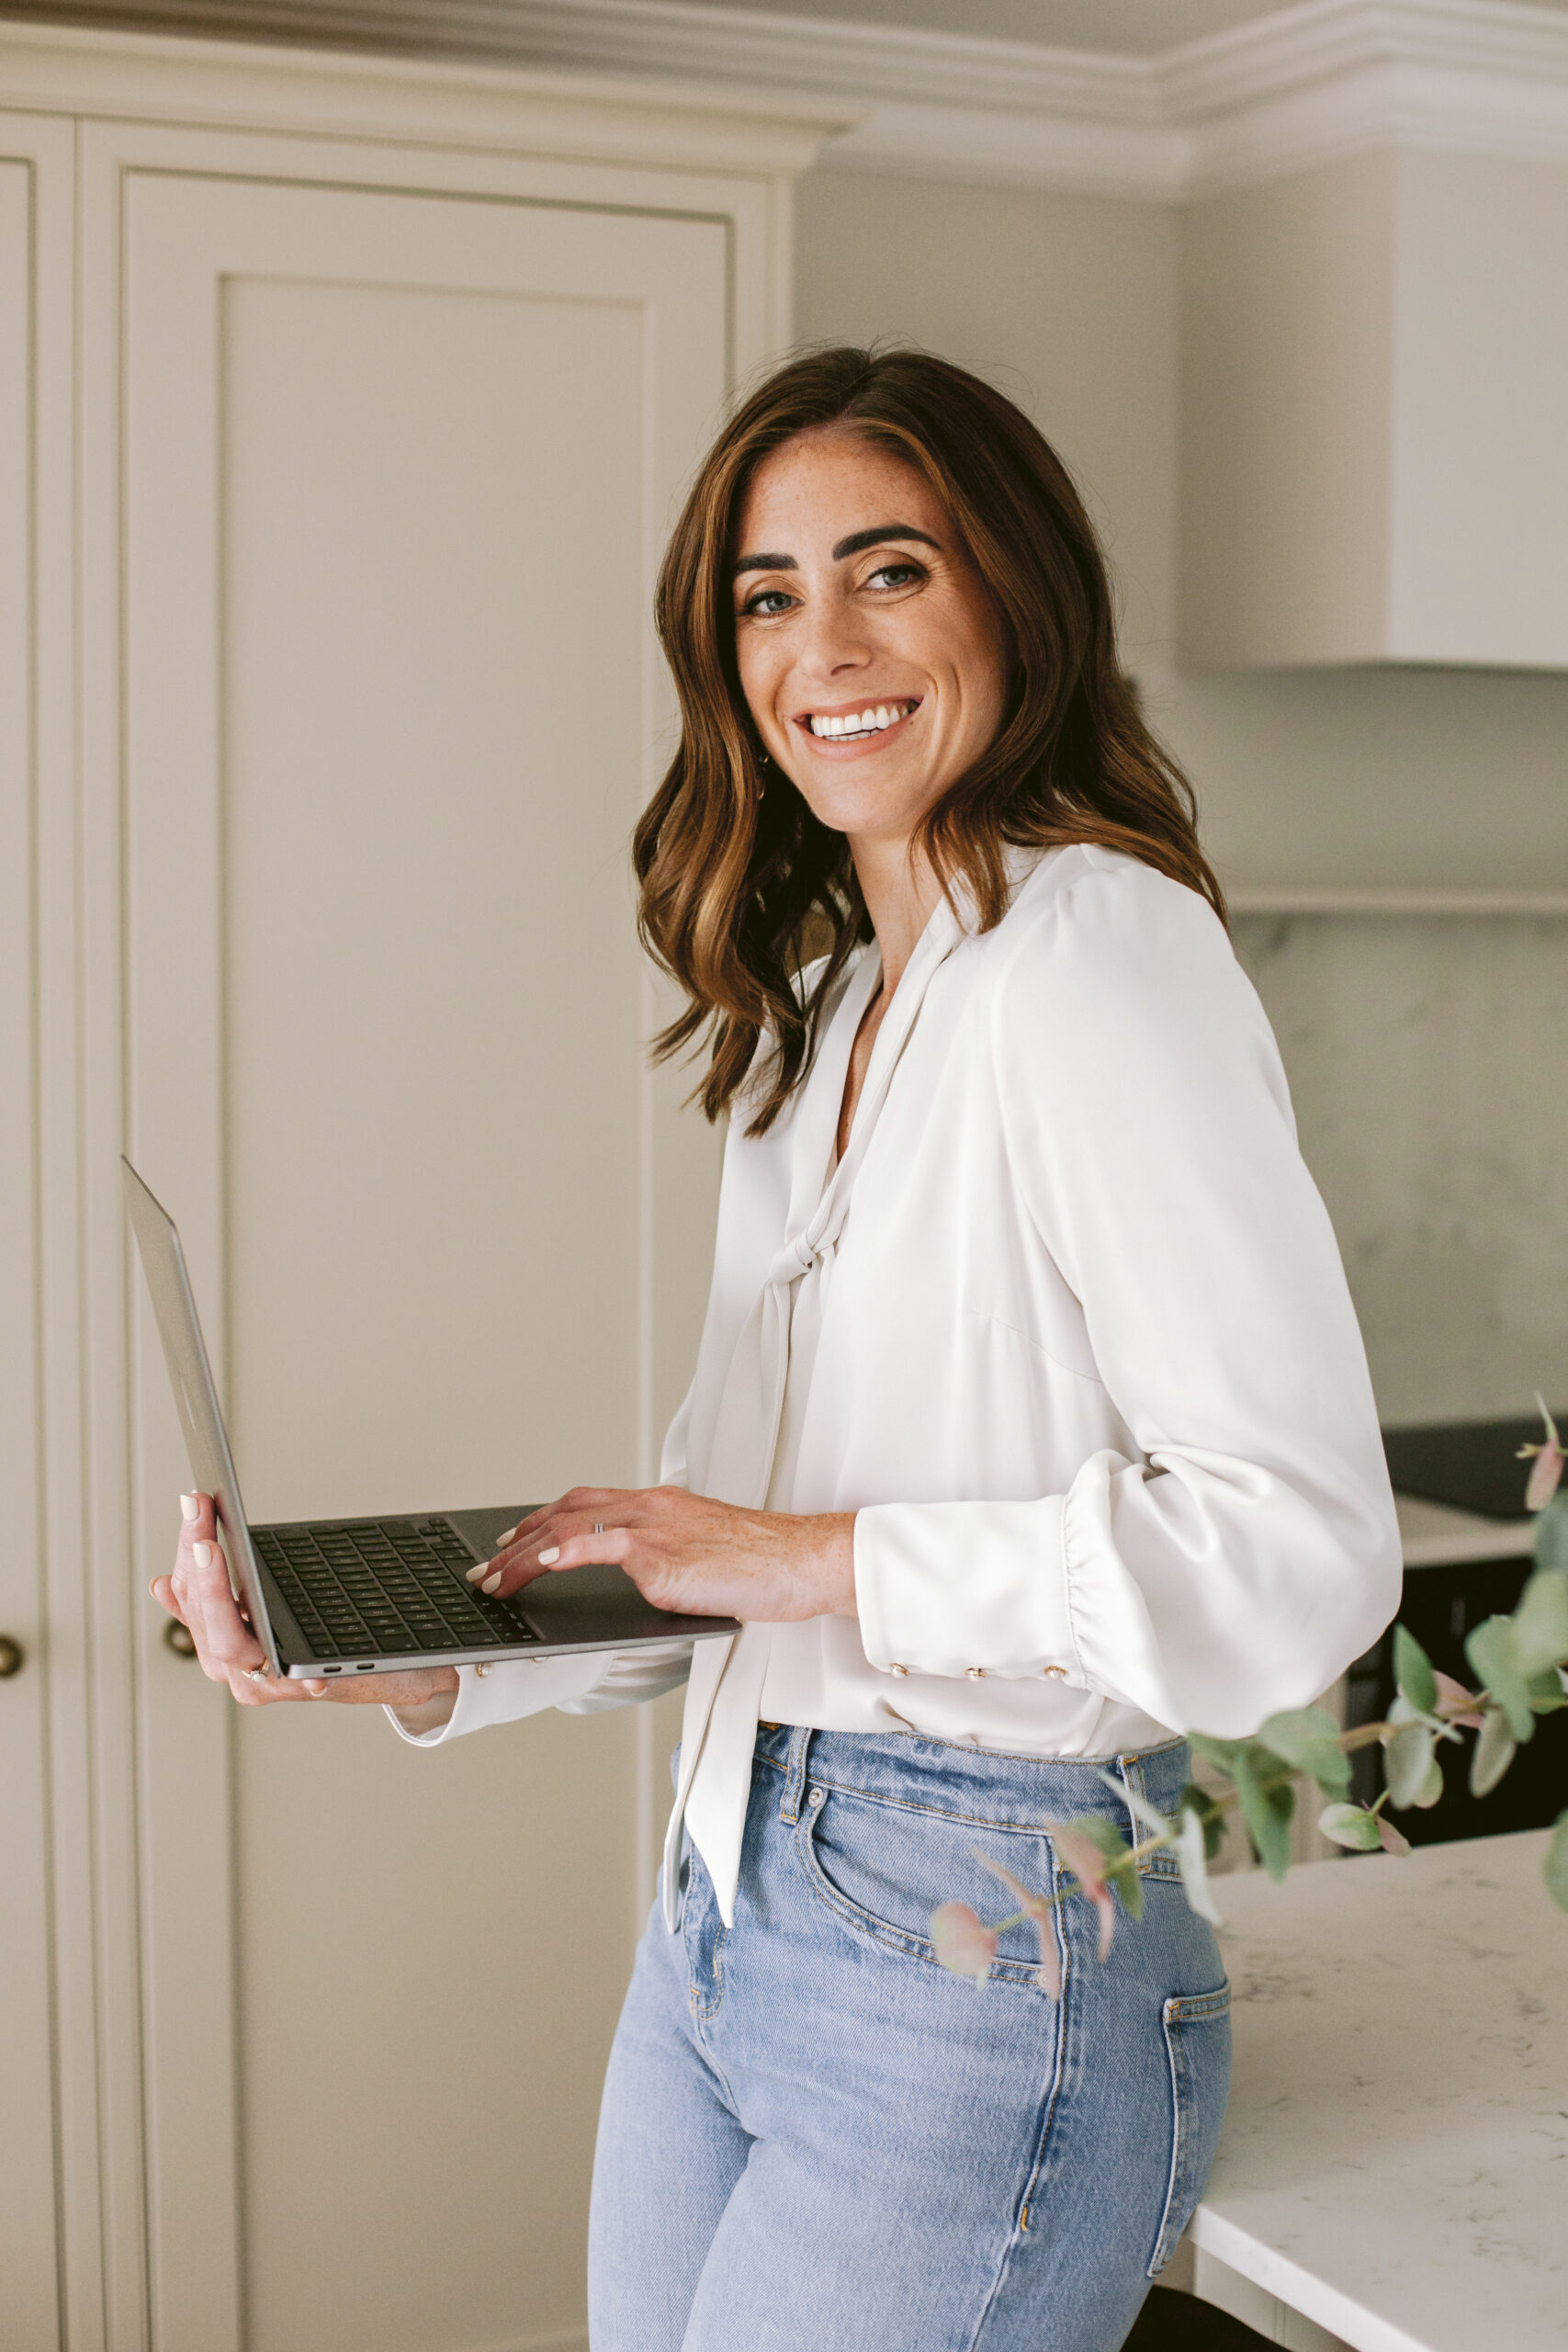 chloe caldwell photography, a mentor for photographers, holding her laptop and smiling